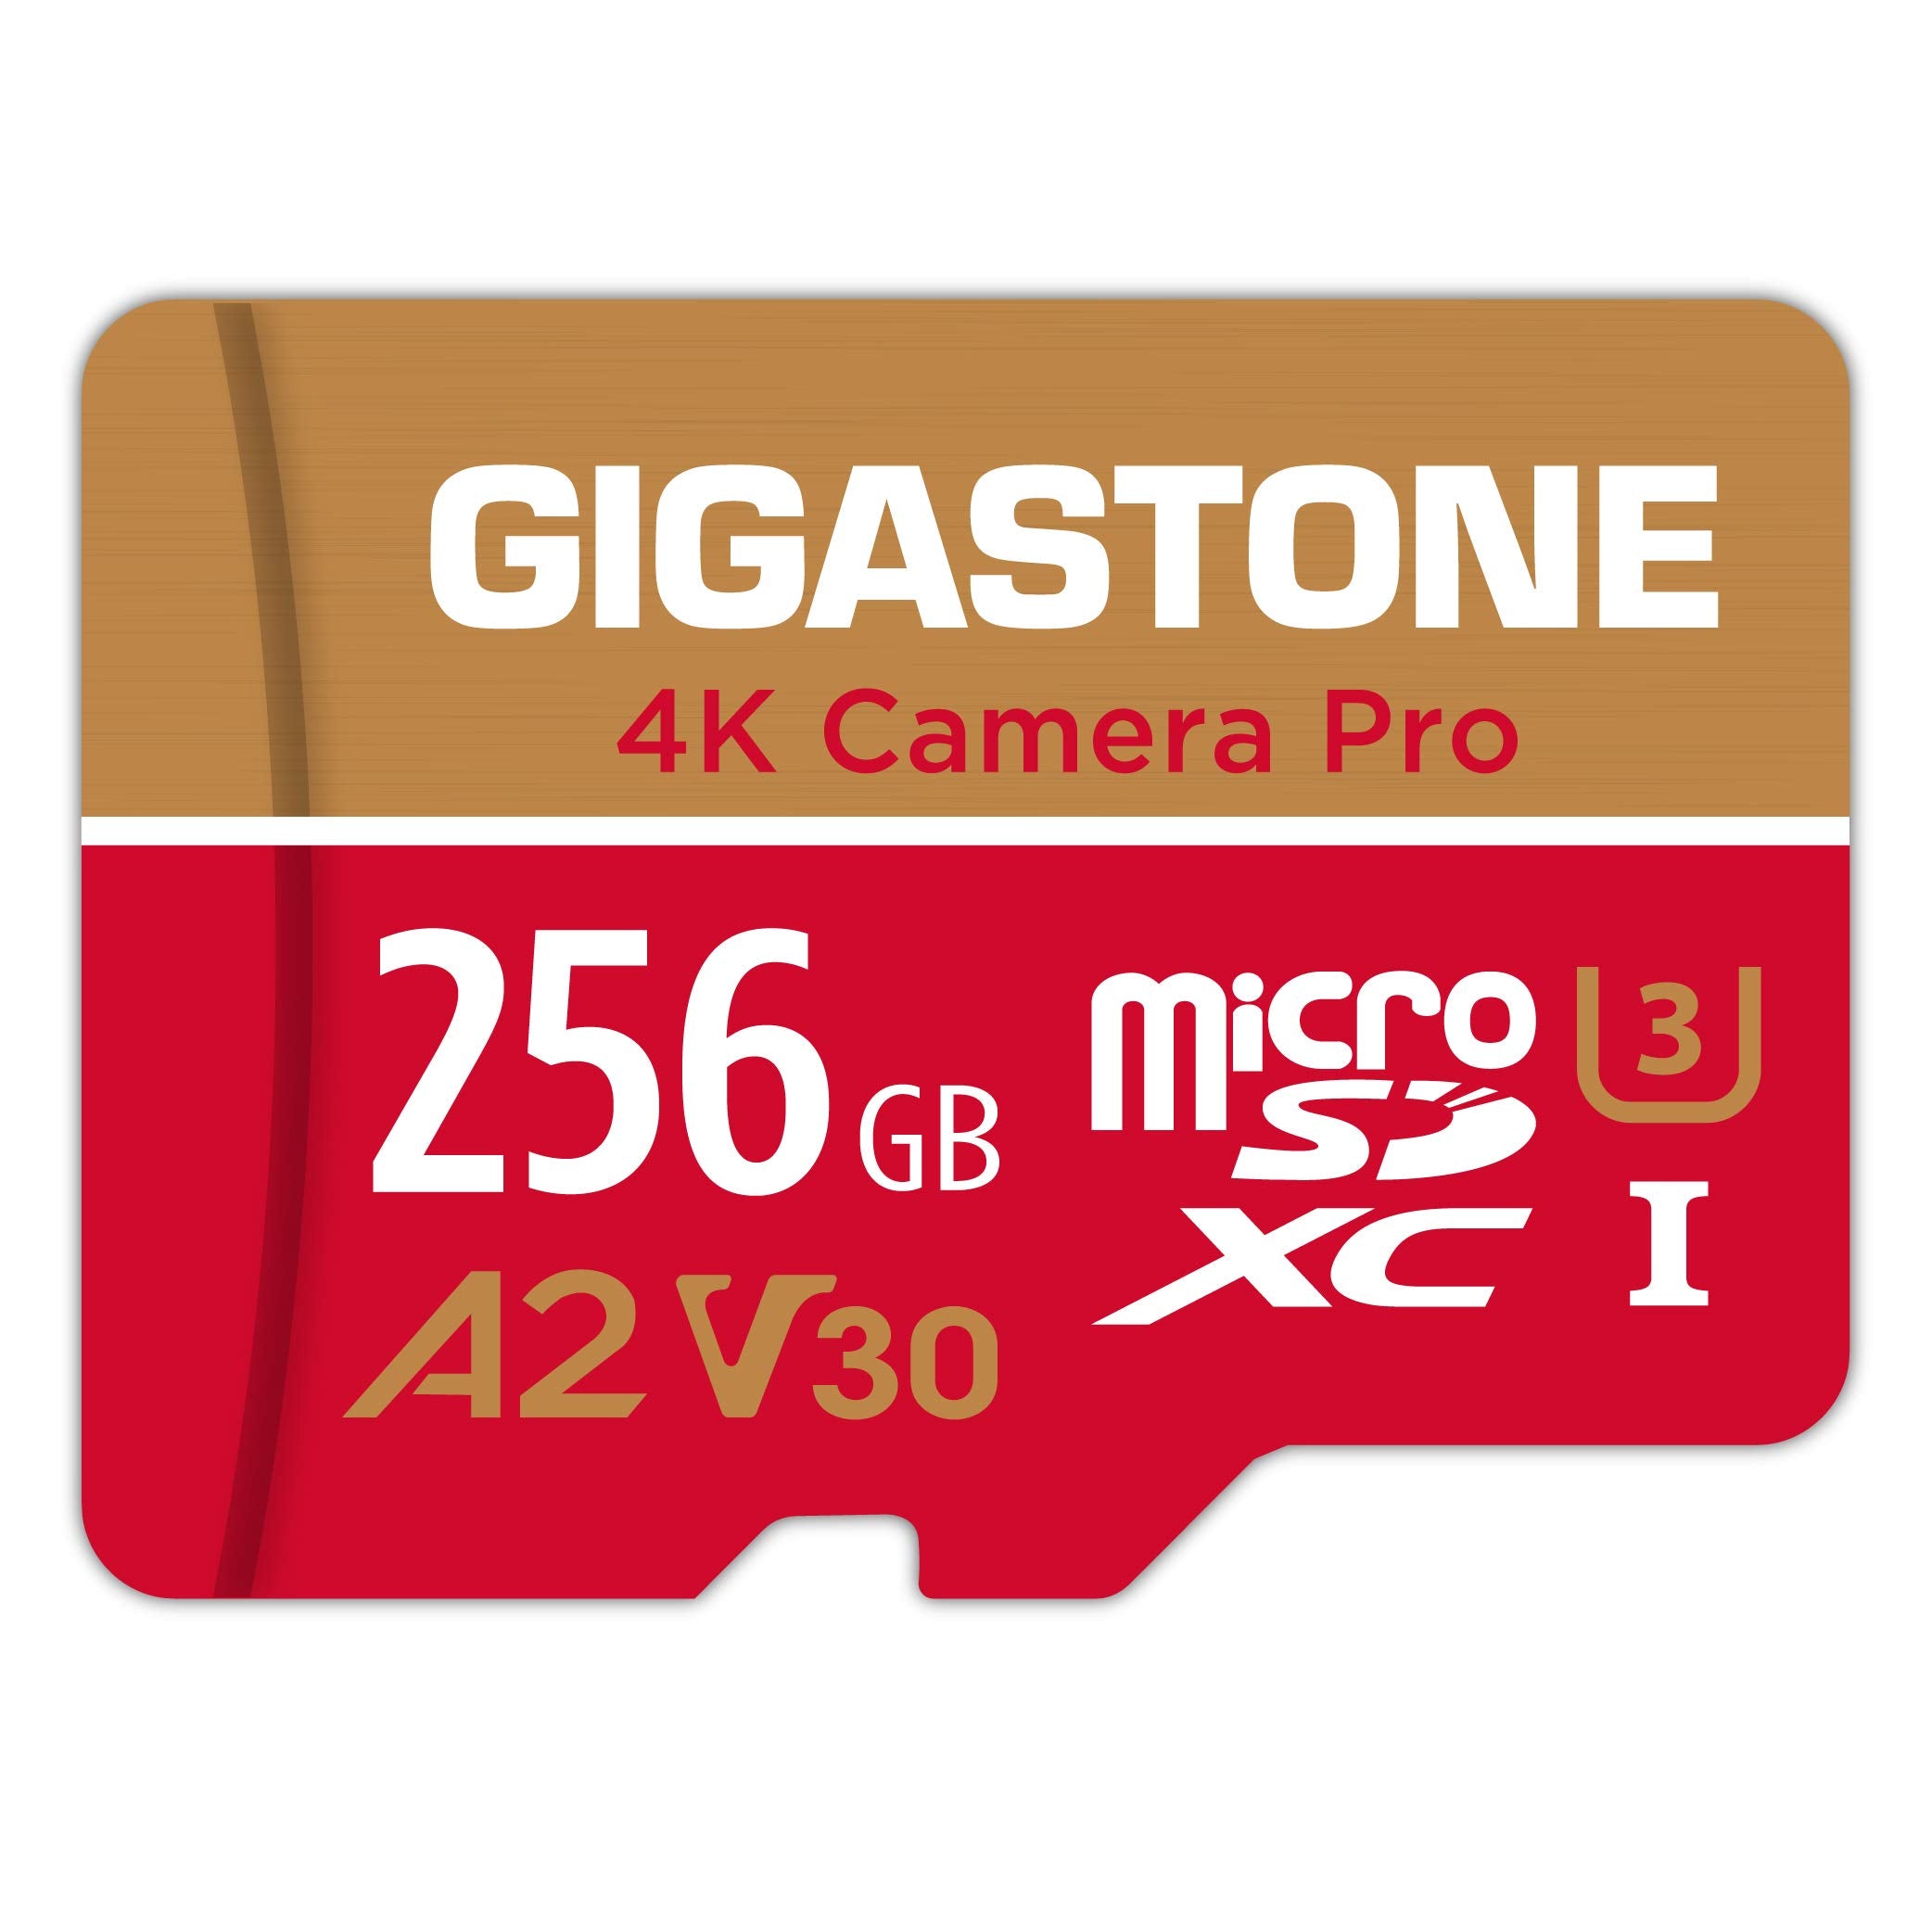 Gigastone Micro SD Card 256GB with SD Adapter + Mini-case, 4K Camera Pro, 4K UHD Video Recording, GoPro SD card Action Camera Compatible, R/W up to 100/60MB/s, MicroSDXC UHS-I A2 V30 U3 Class 10